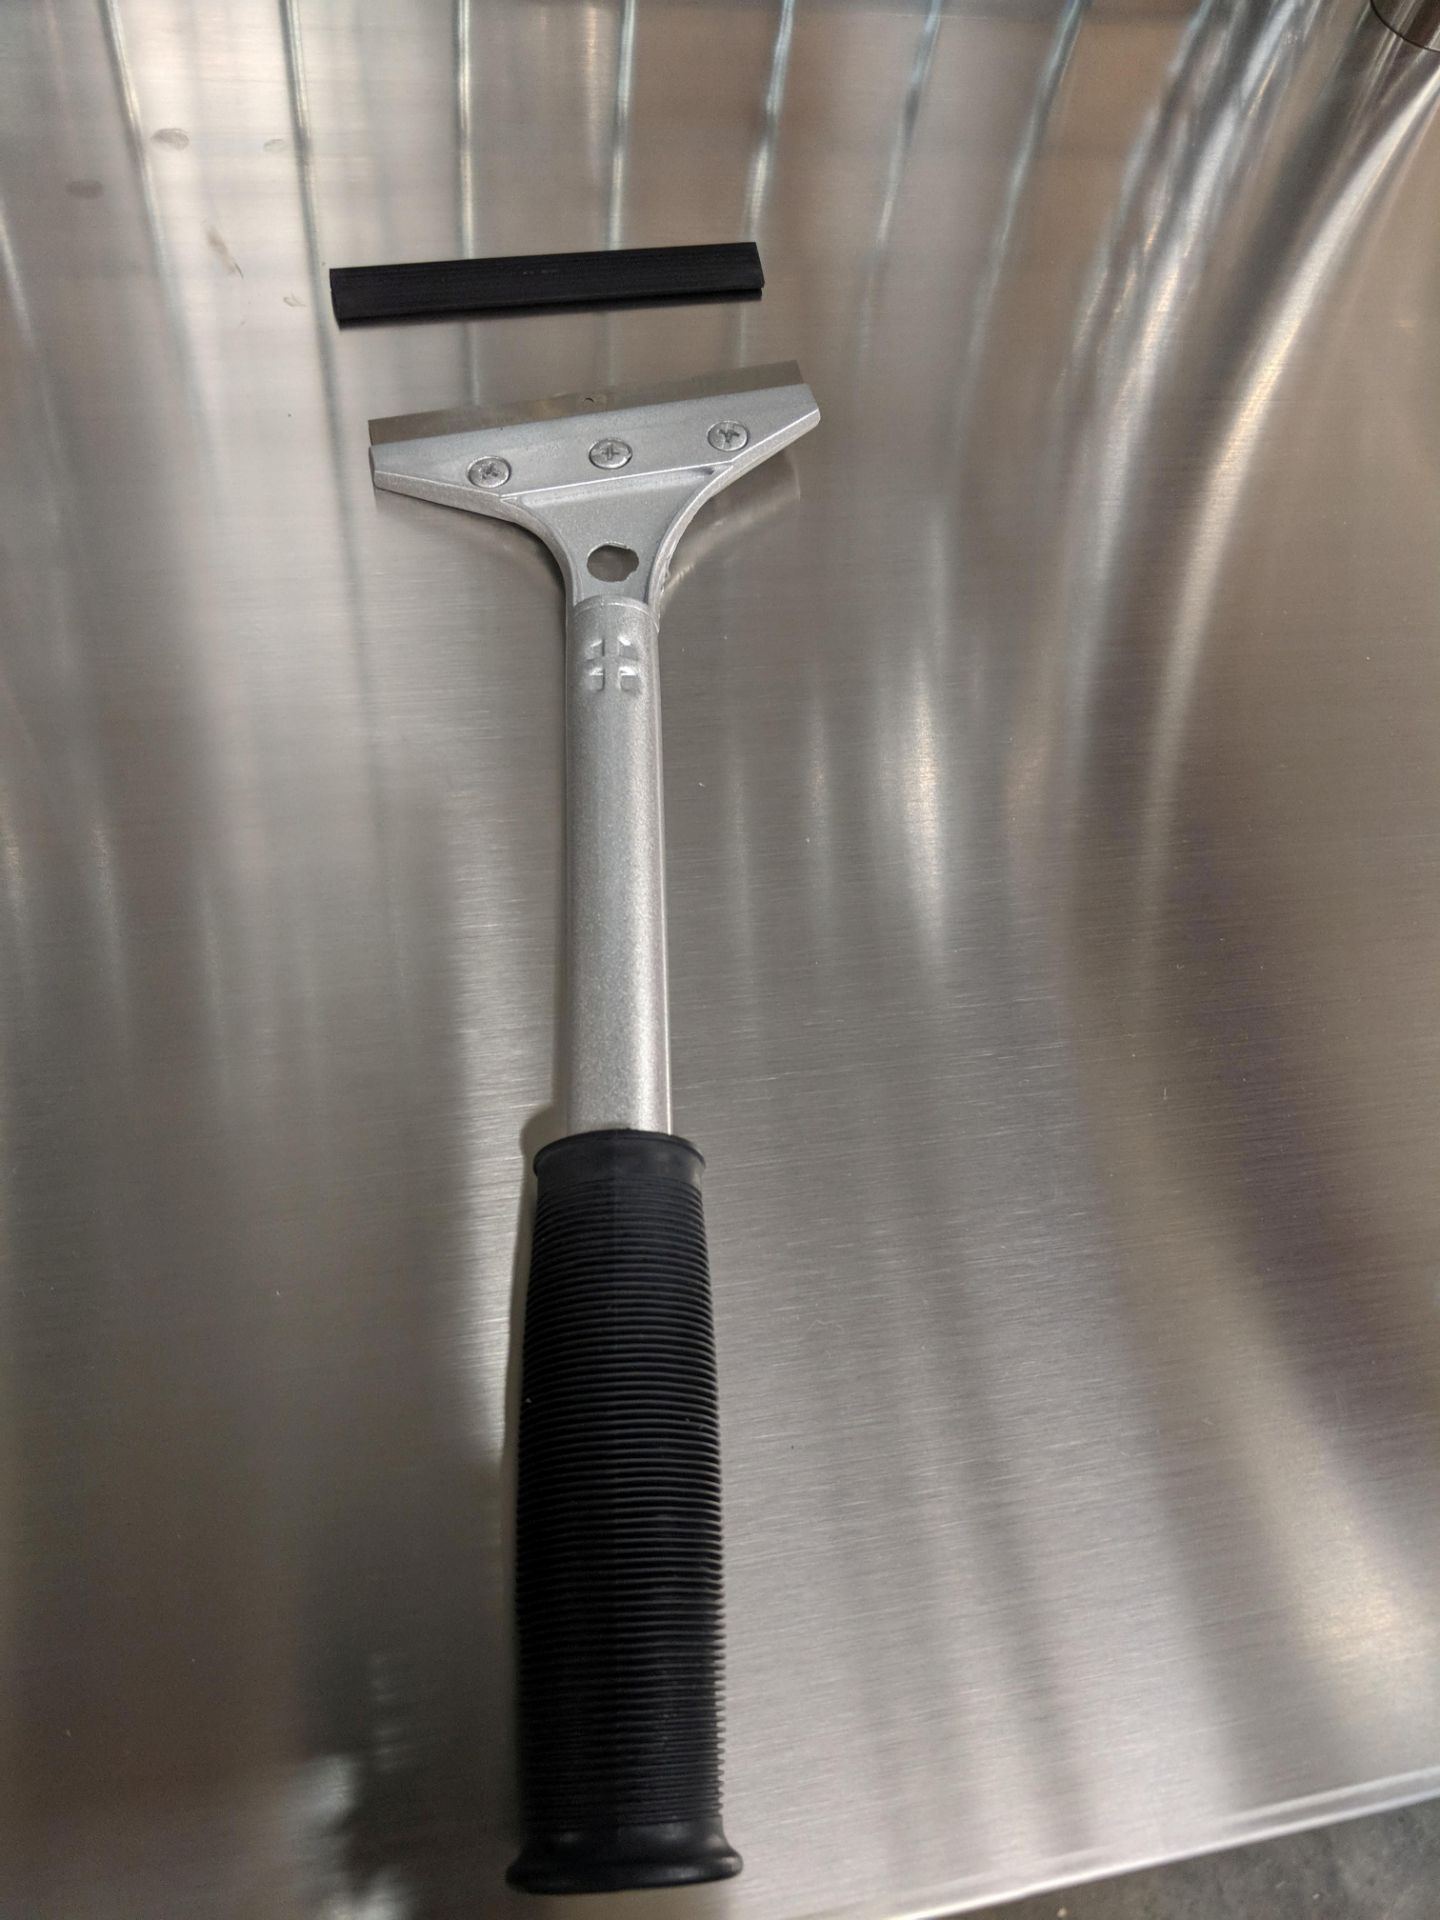 Aluminum 12" Griddle Scraper with Rubber Handle - Image 2 of 2